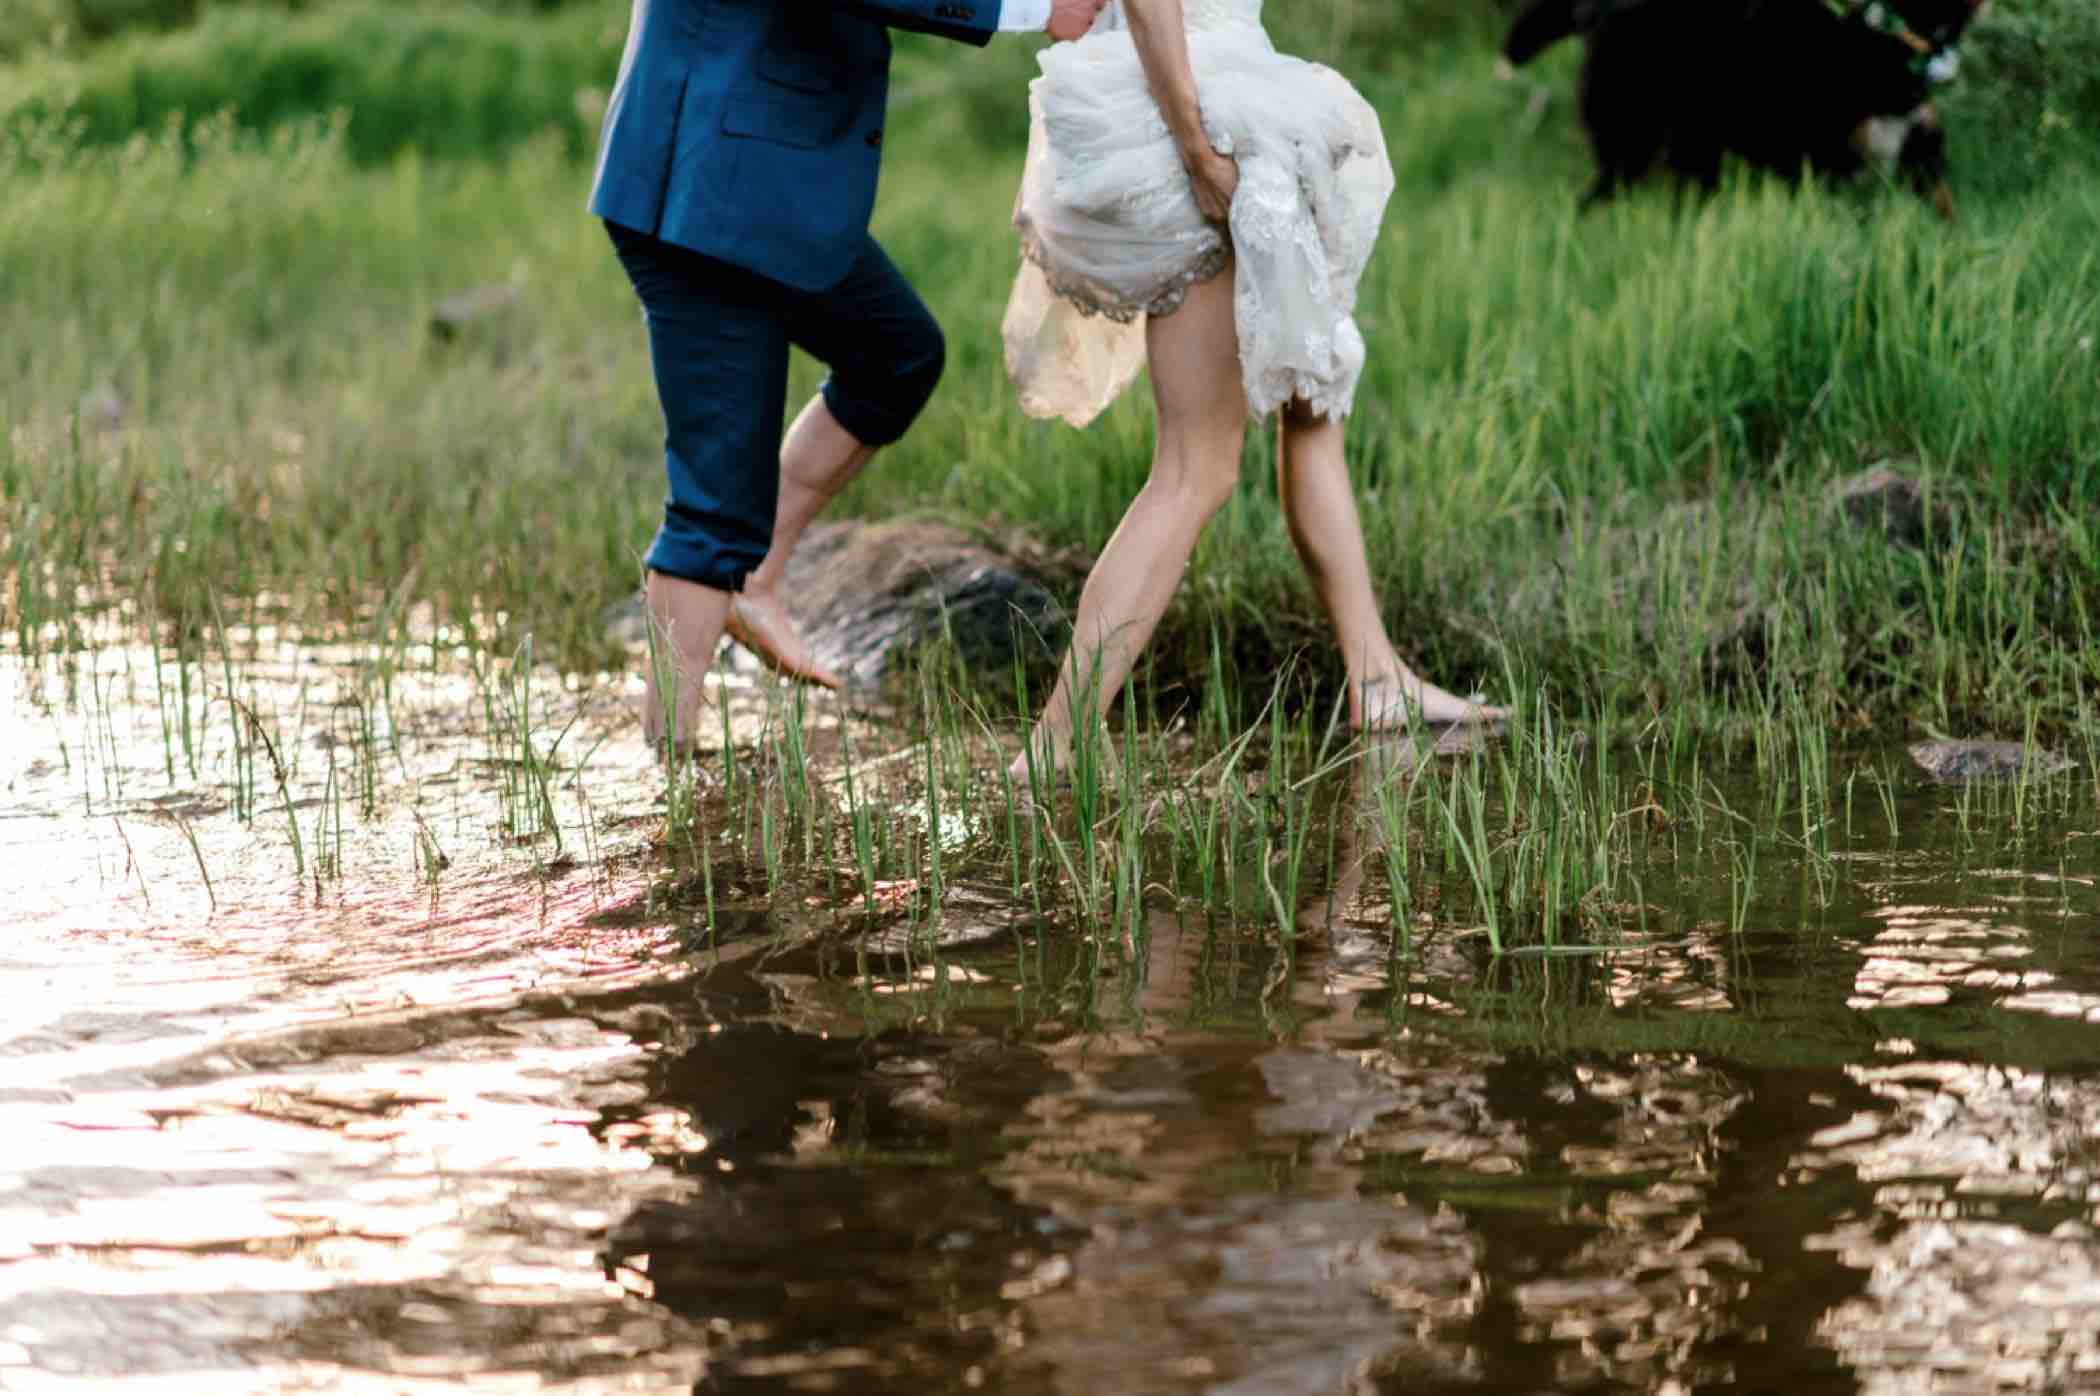 Kris and Sallie walk through Piney Lake for their bride and groom portraits after their wedding at Piney River Ranch in Vail, Colorado. Photo by Ali and Garrett, Romantic, Adventurous, Nostalgic Wedding Photographers.